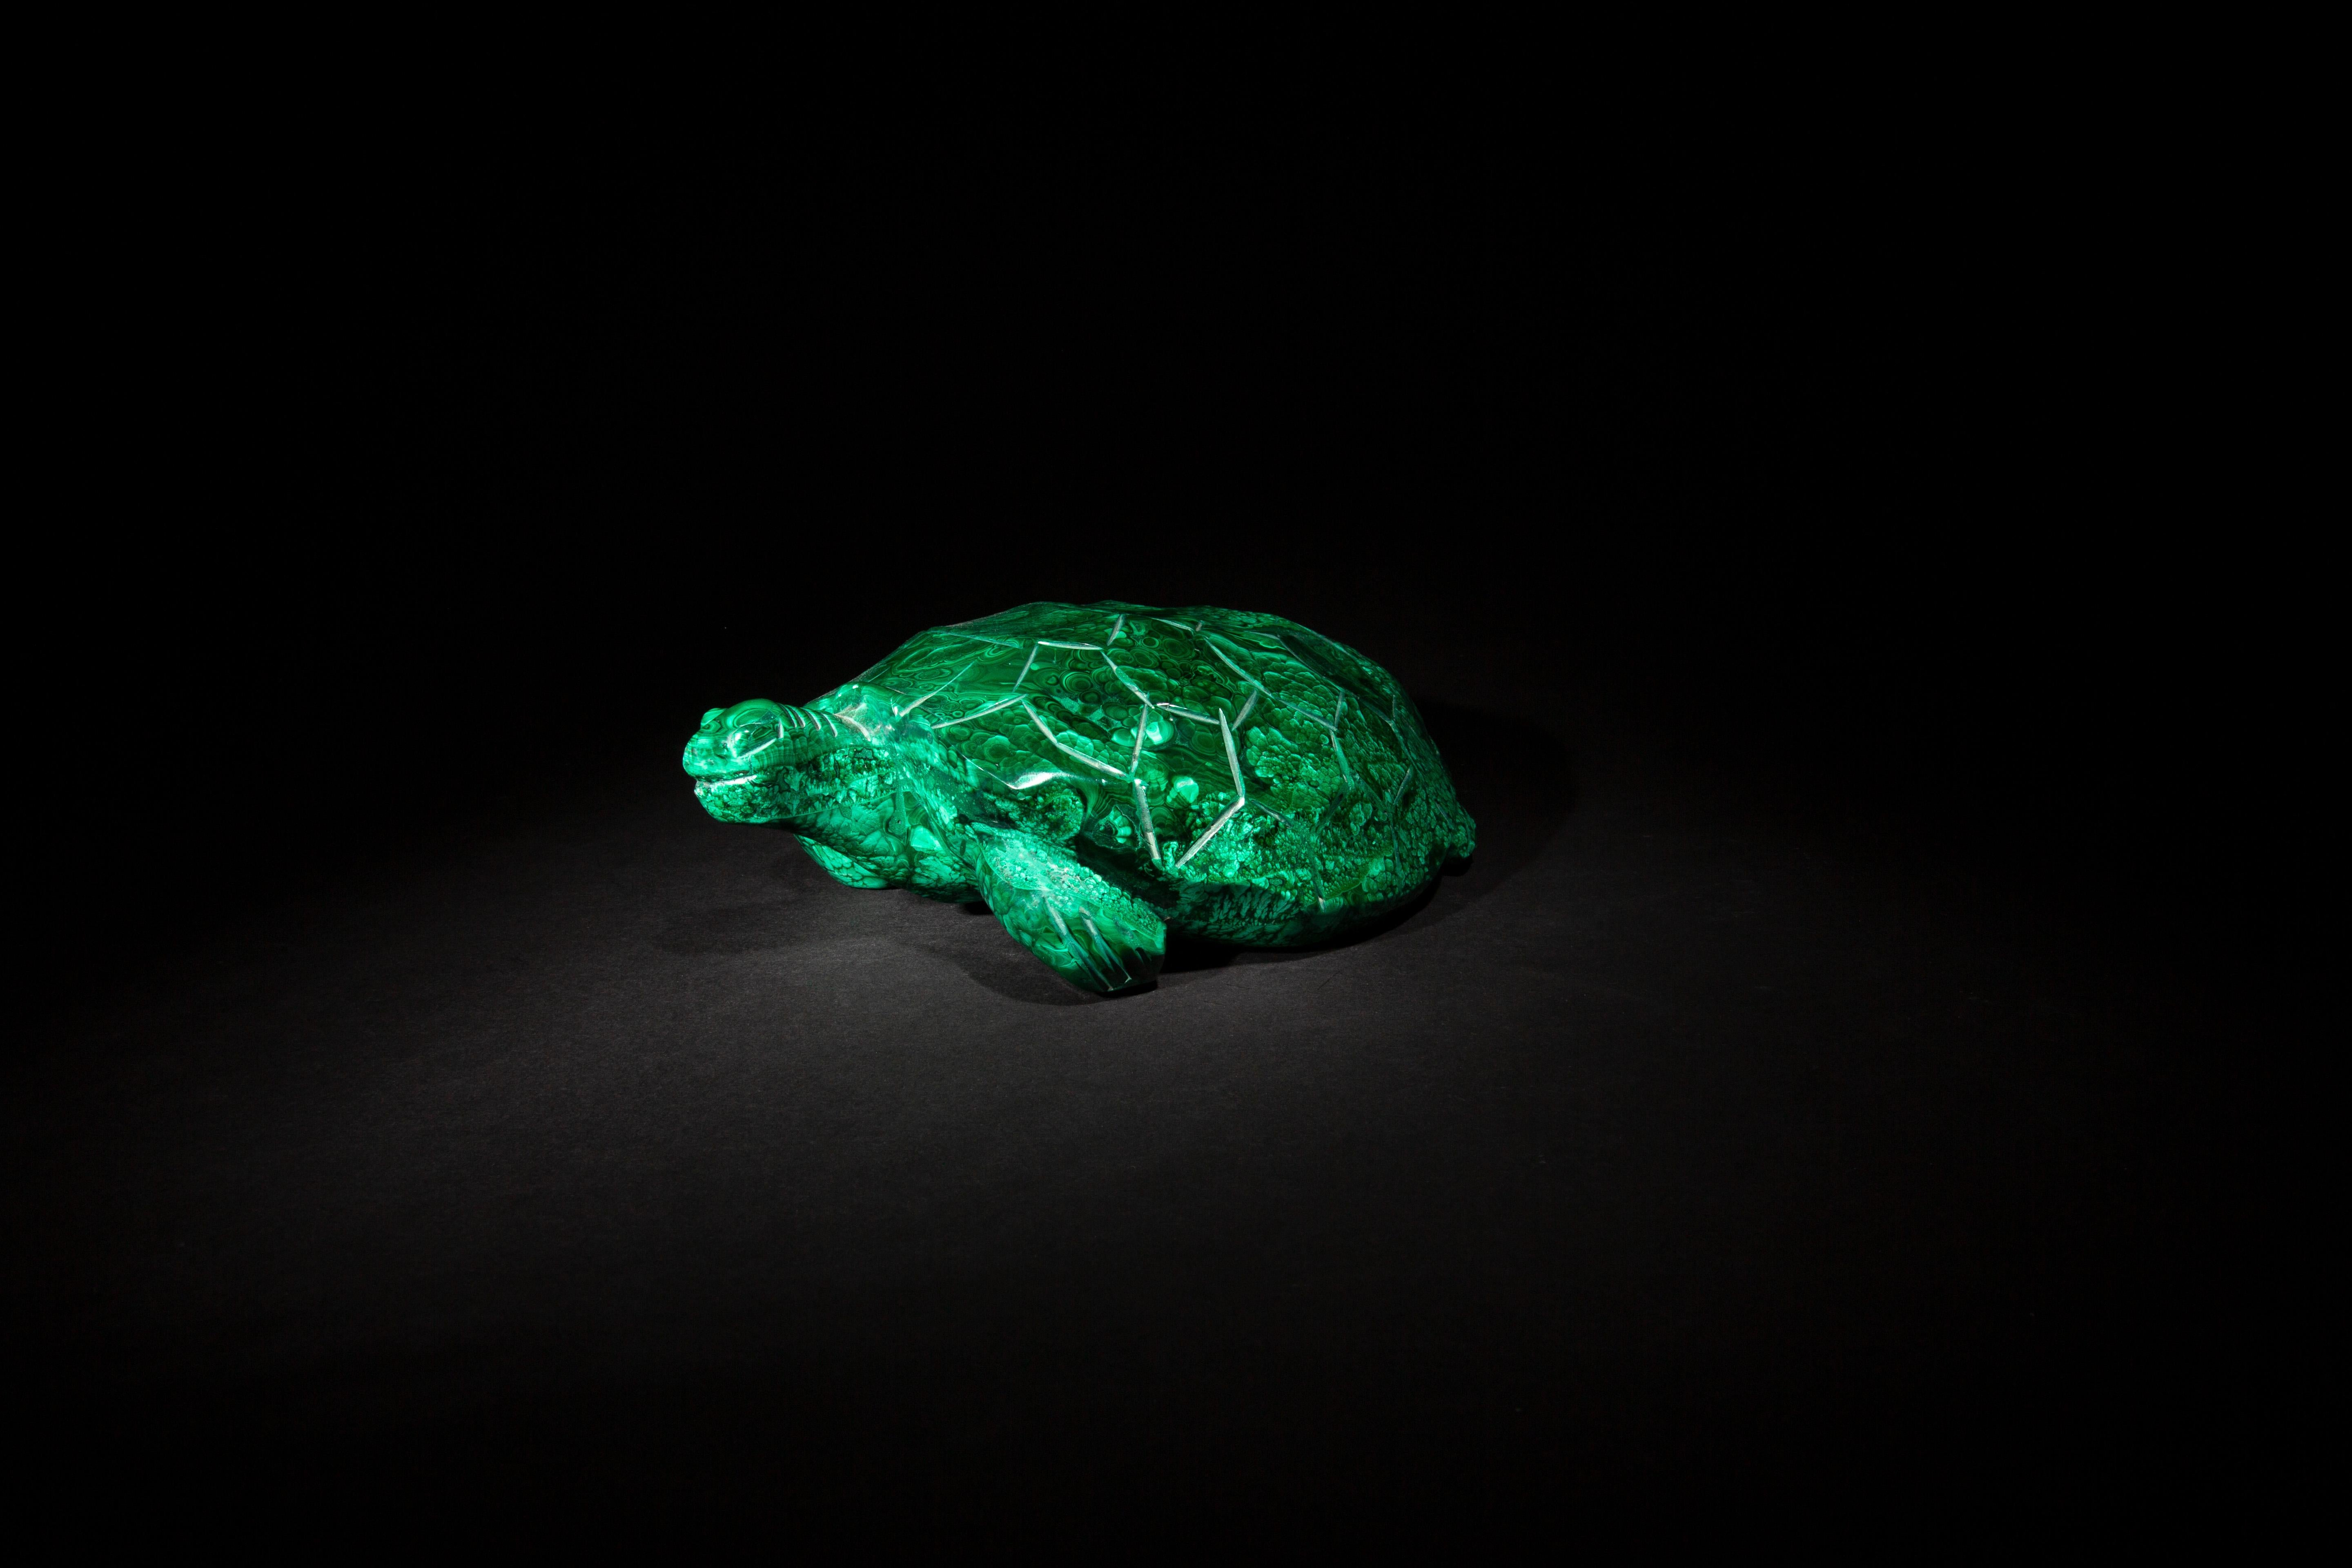 This elegant malachite turtle sculpture, measuring 8.5 inches by 6 inches by 2.75 inches, is a true gem of craftsmanship. Skillfully carved from premium malachite, it features the stone's signature vibrant green swirls and intricate patterns, which